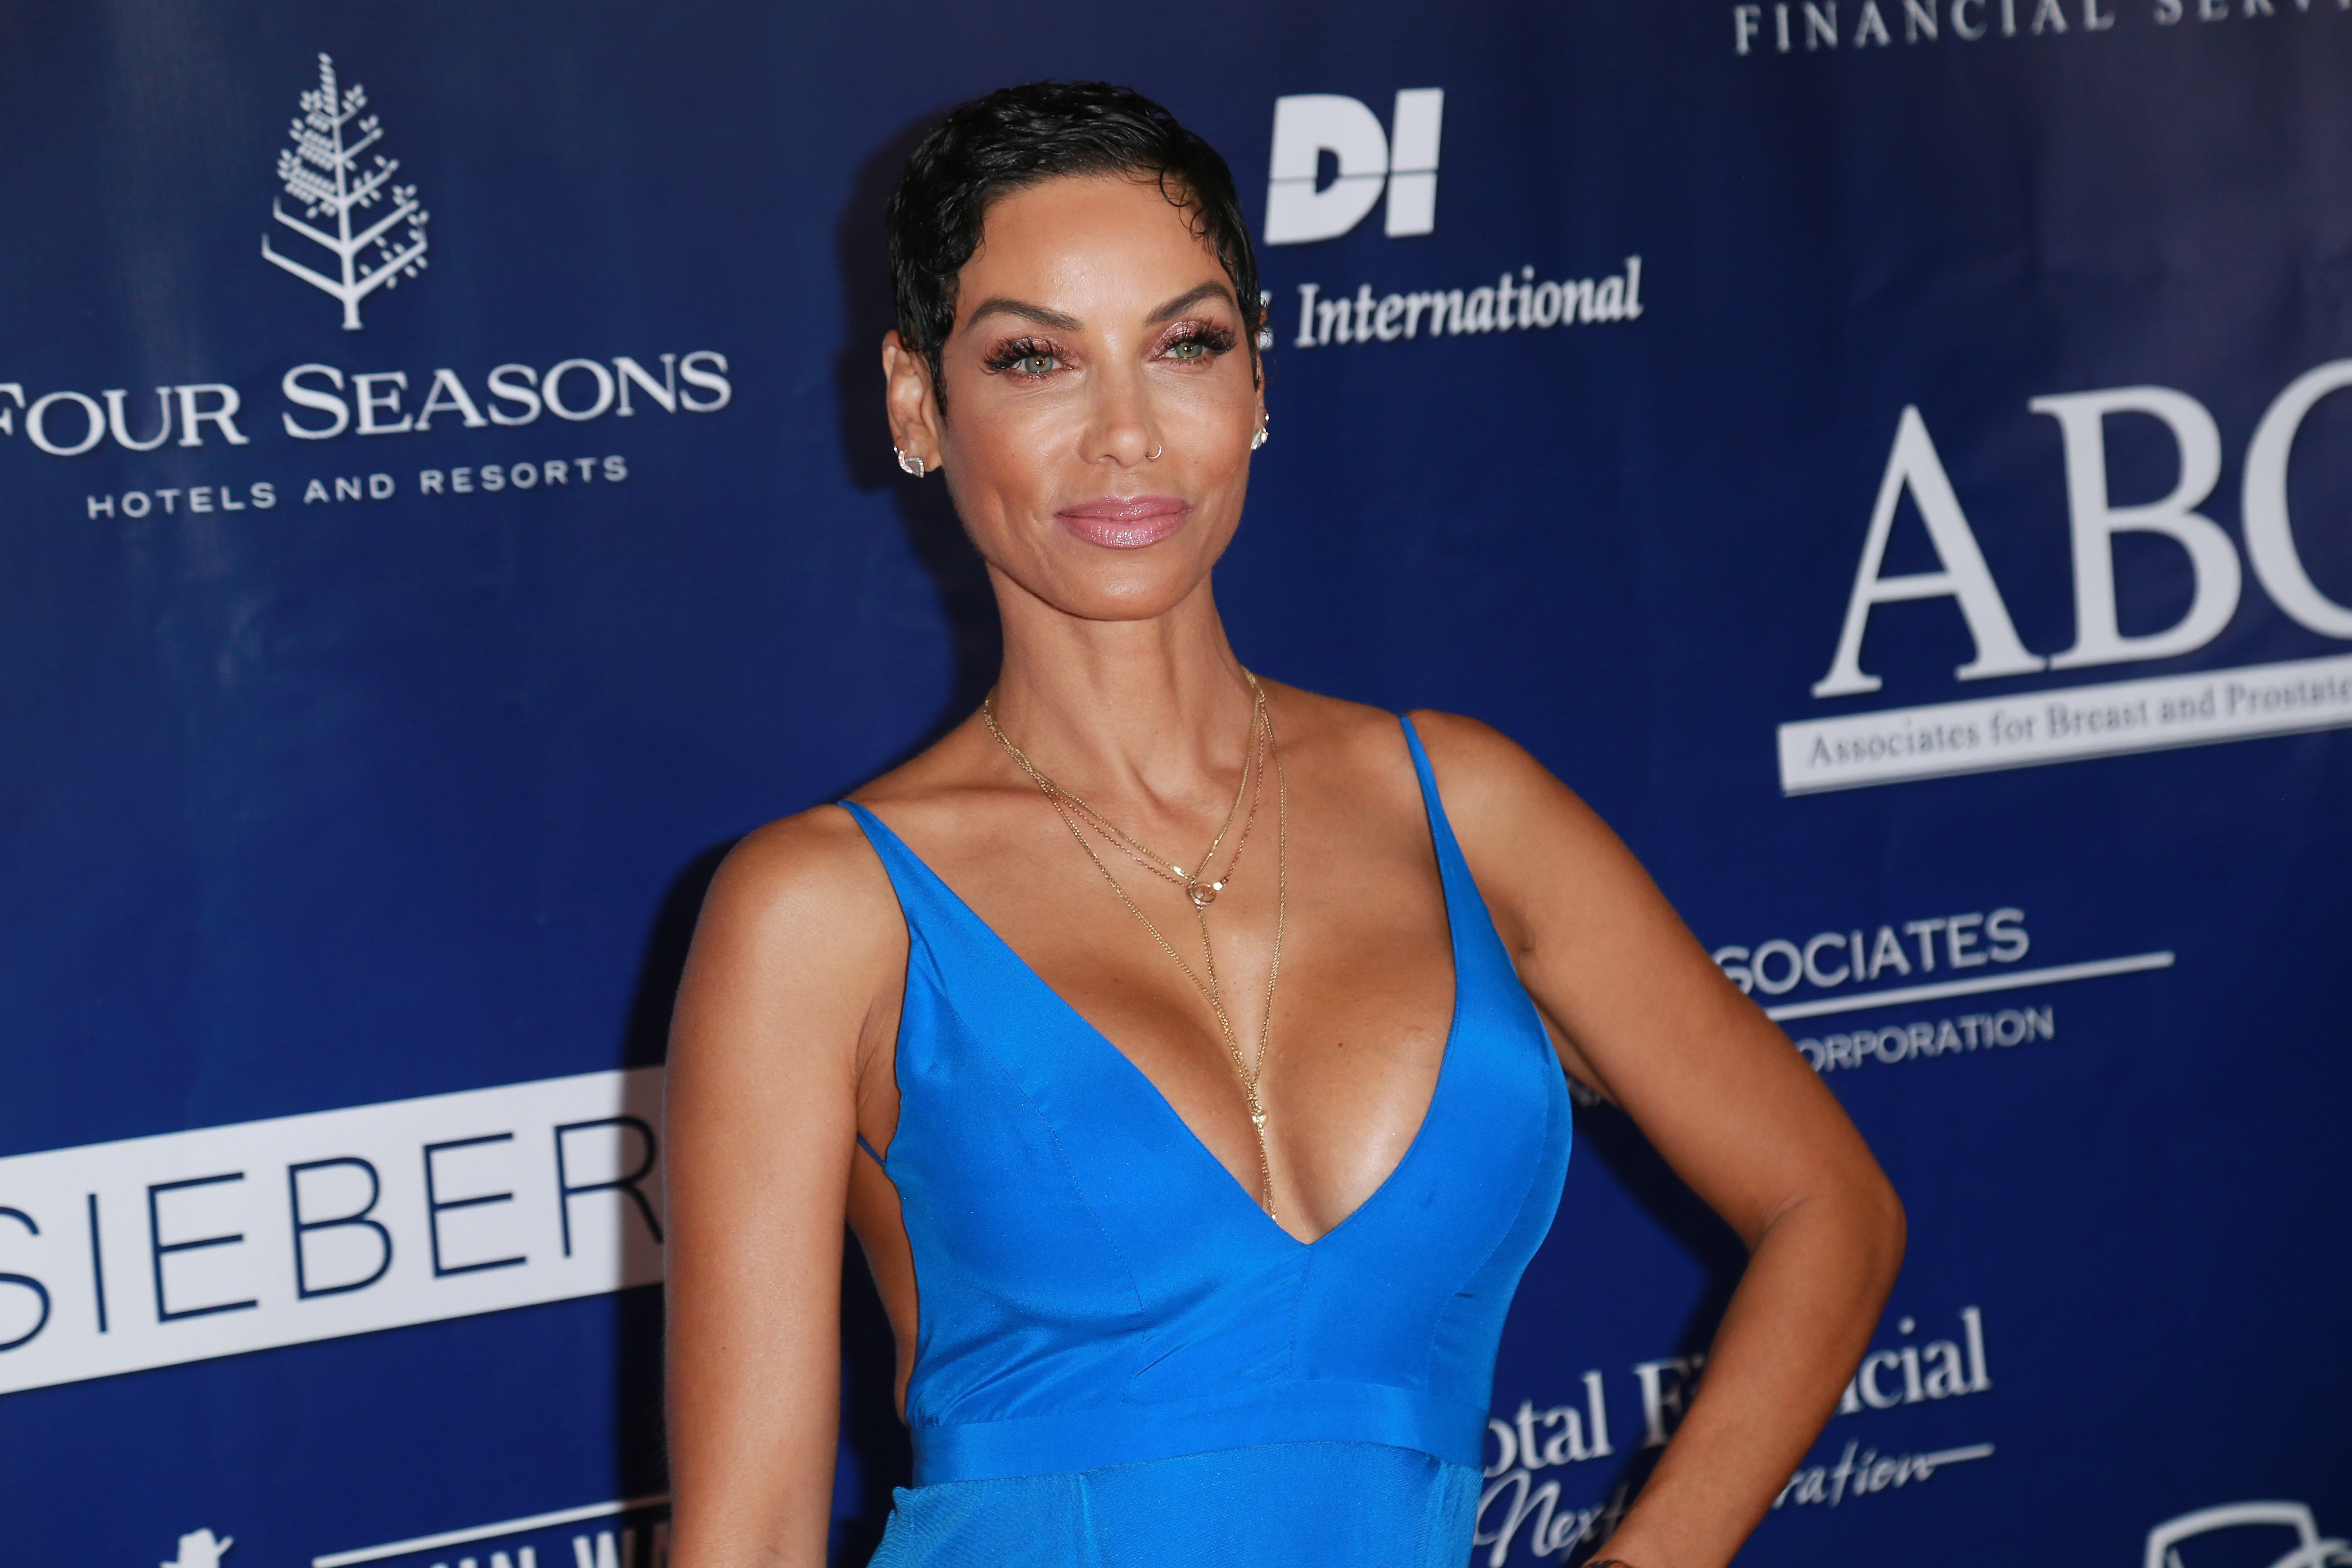 Nicole Mitchell Murphy attends the 28th Annual Talk of the Town Gala on November 18, 2017 | Photo: Getty Images